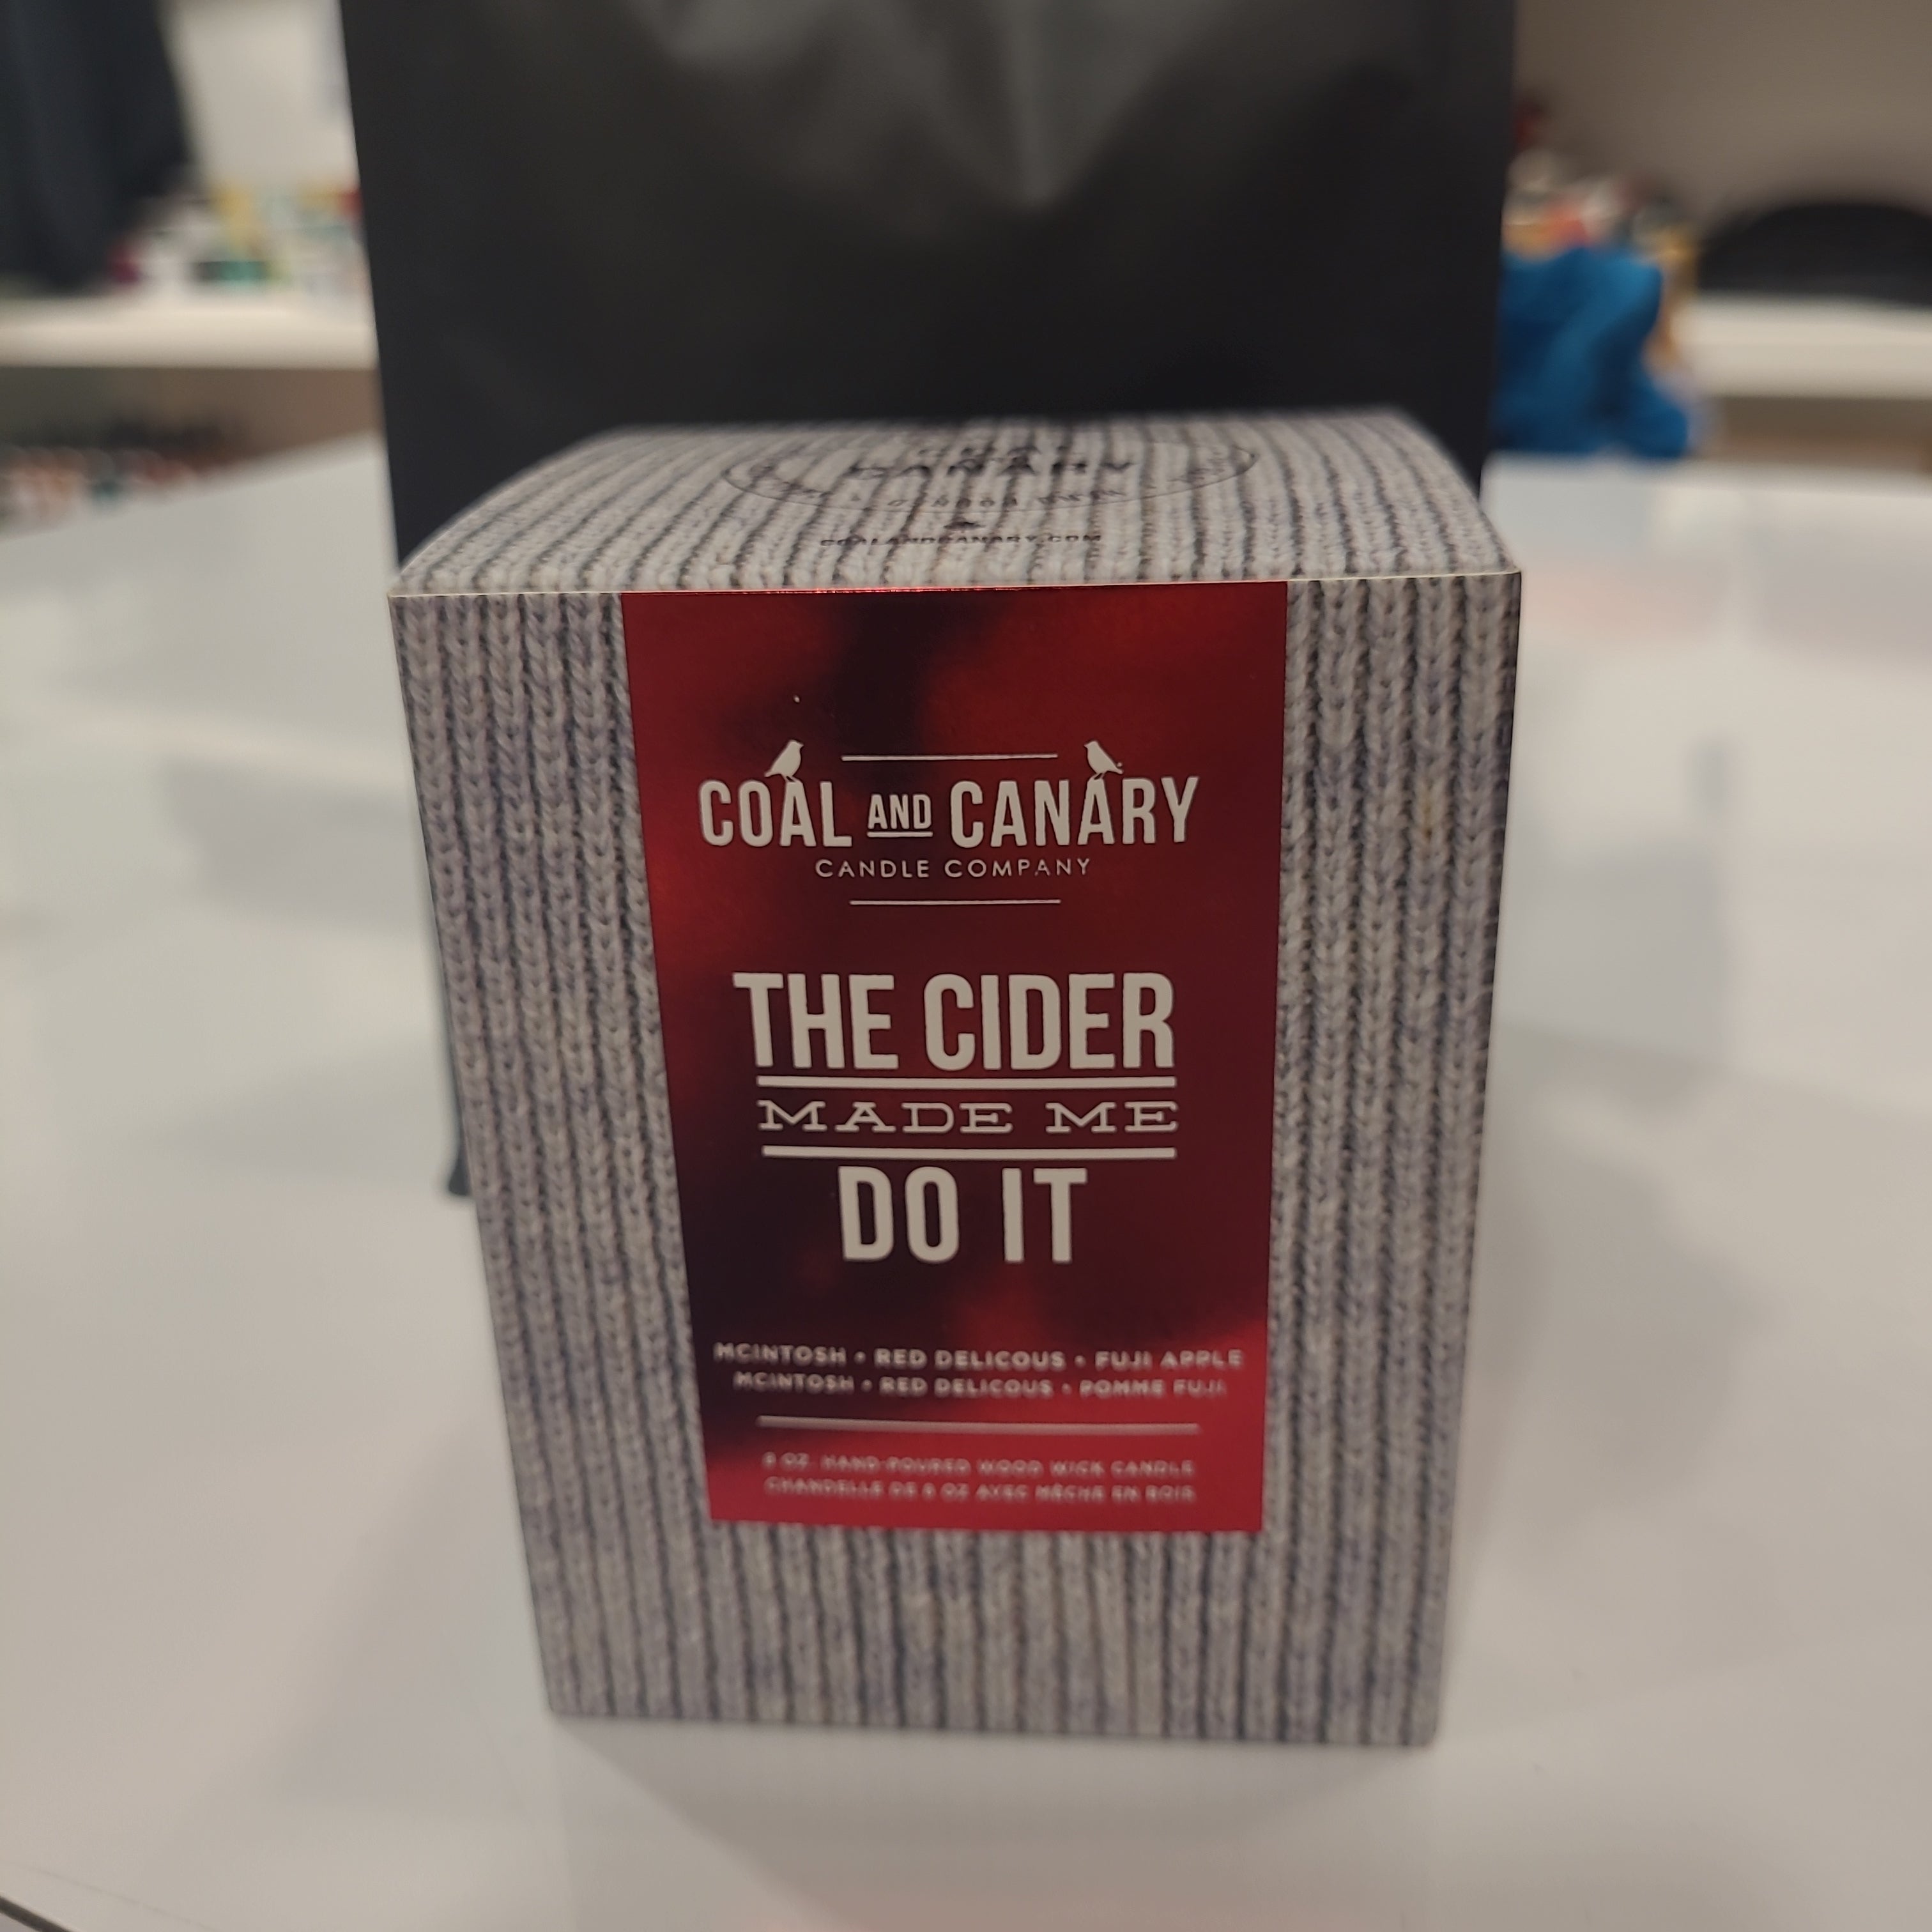 Coal and canary - The cider made me do it